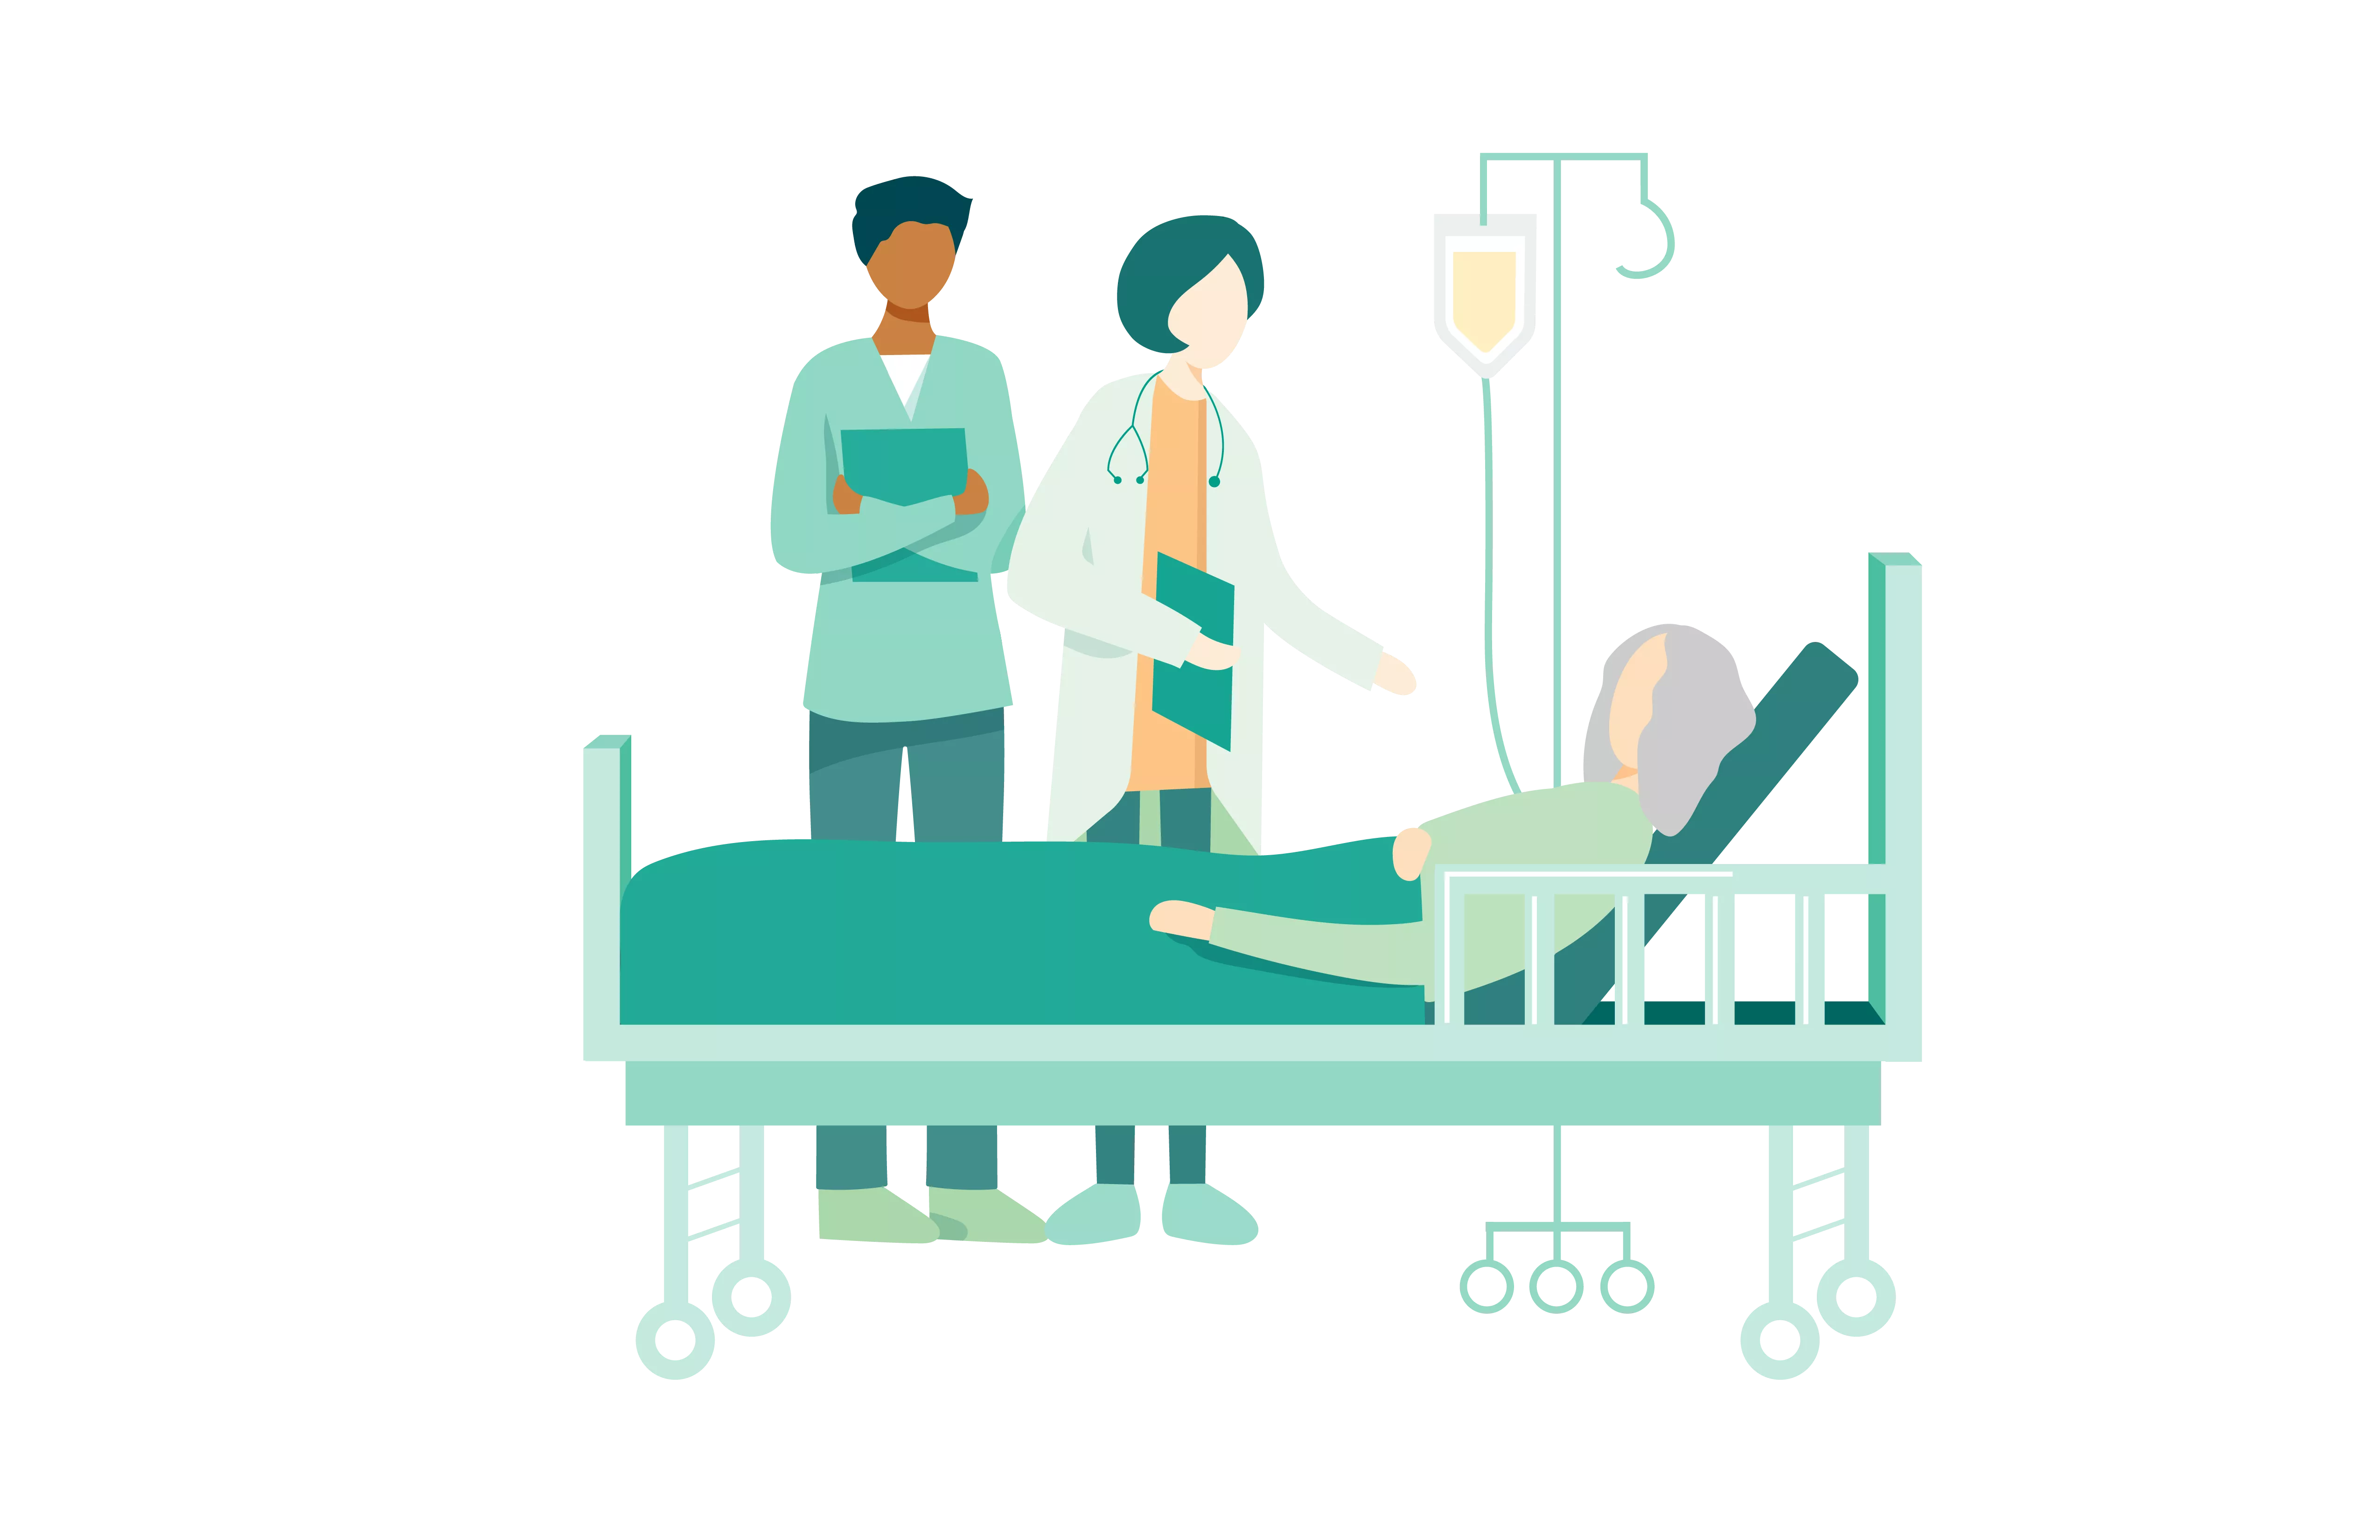 An illustration of a nurse and doctor speaking to patient in hospital bed